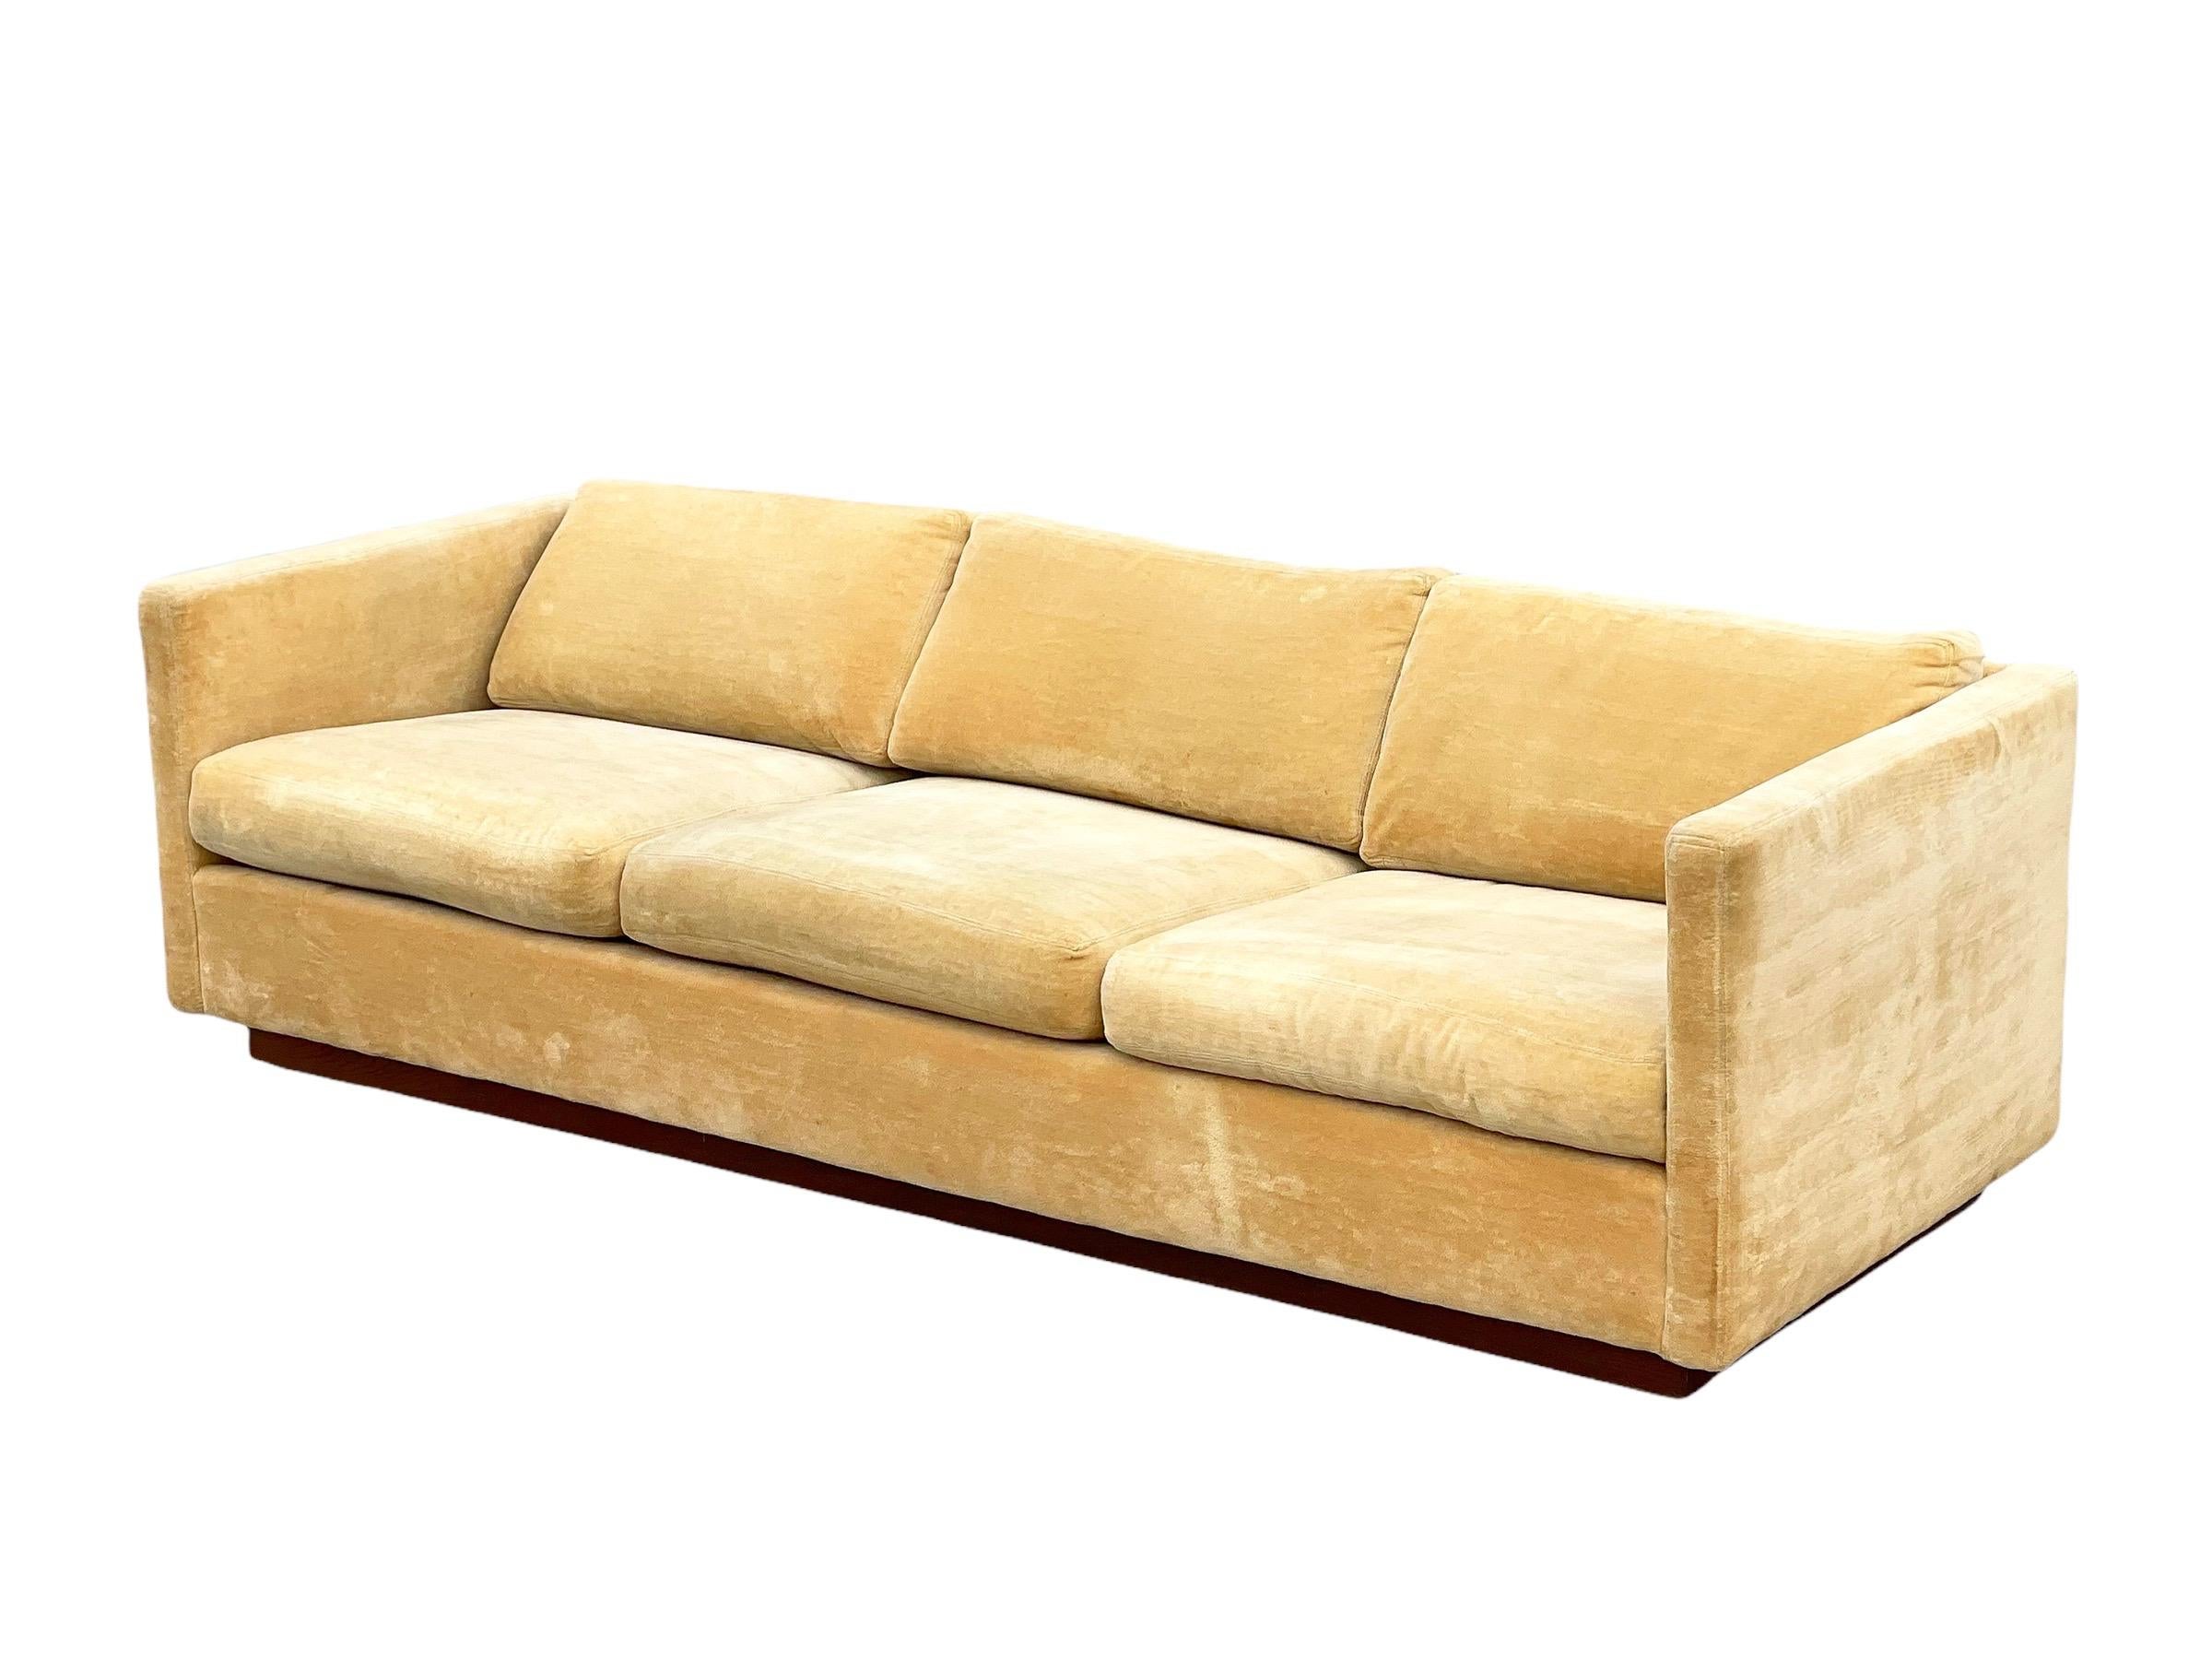 Stunning Mid-Century Modern Milo Baughman for Thayer Coggin tuxedo style sofa and loveseat living room set. Harvest gold velvet cushions and case atop a recessed walnut plinth base. Stout and sturdy American craftsmanship with clean modern lines.